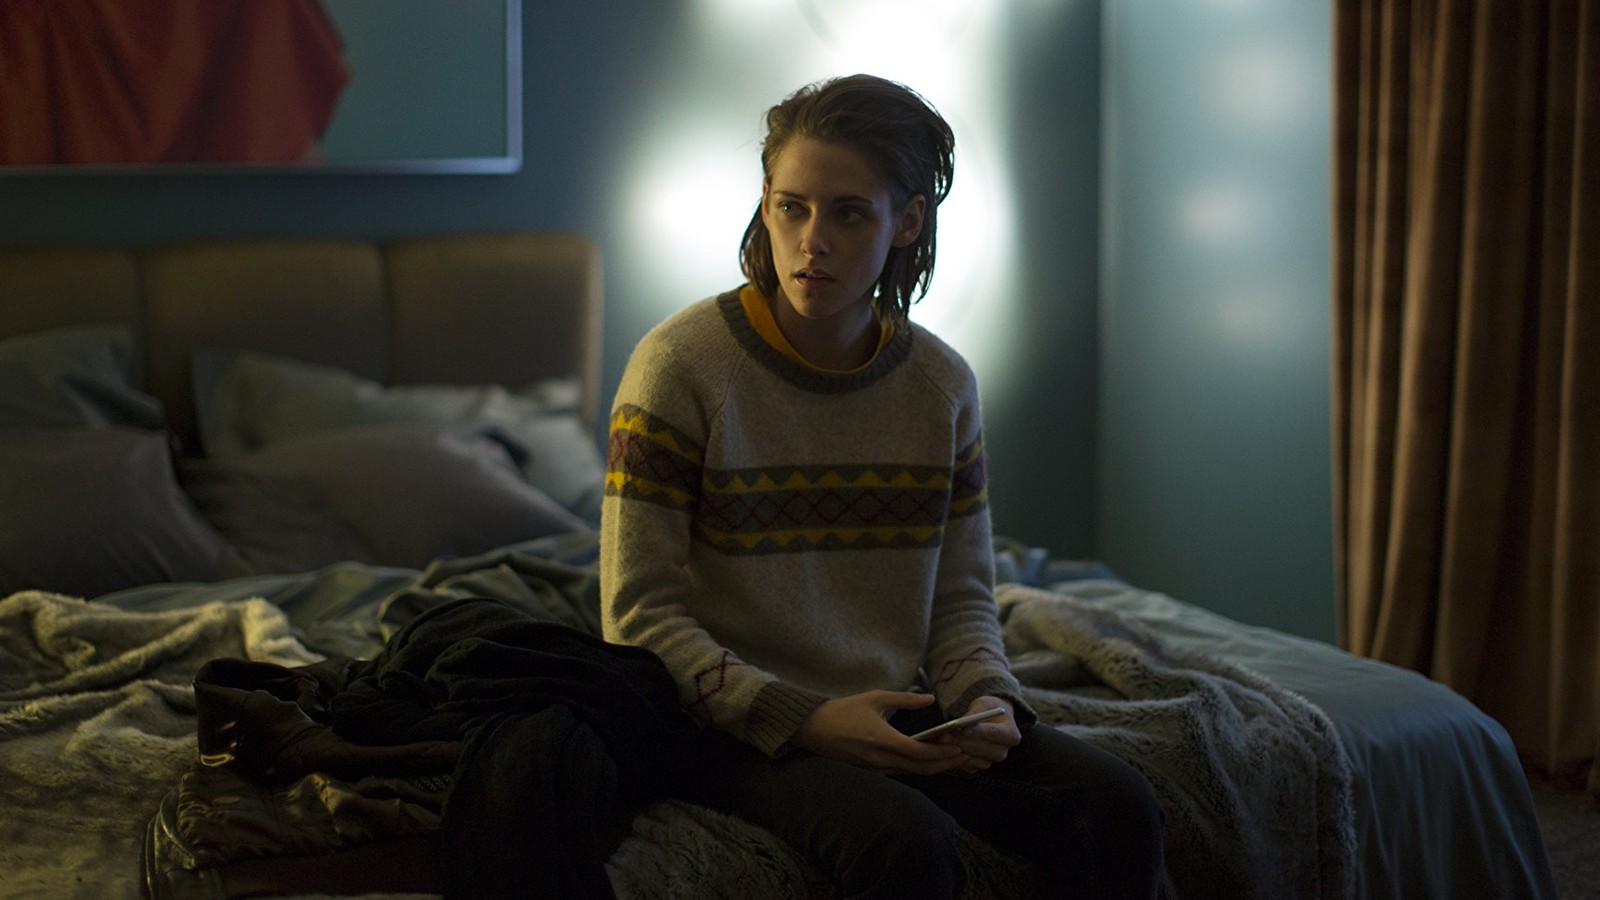 Revisiting the Ghost Story of 'Personal Shopper,' With Kristen Stewart -  The Atlantic